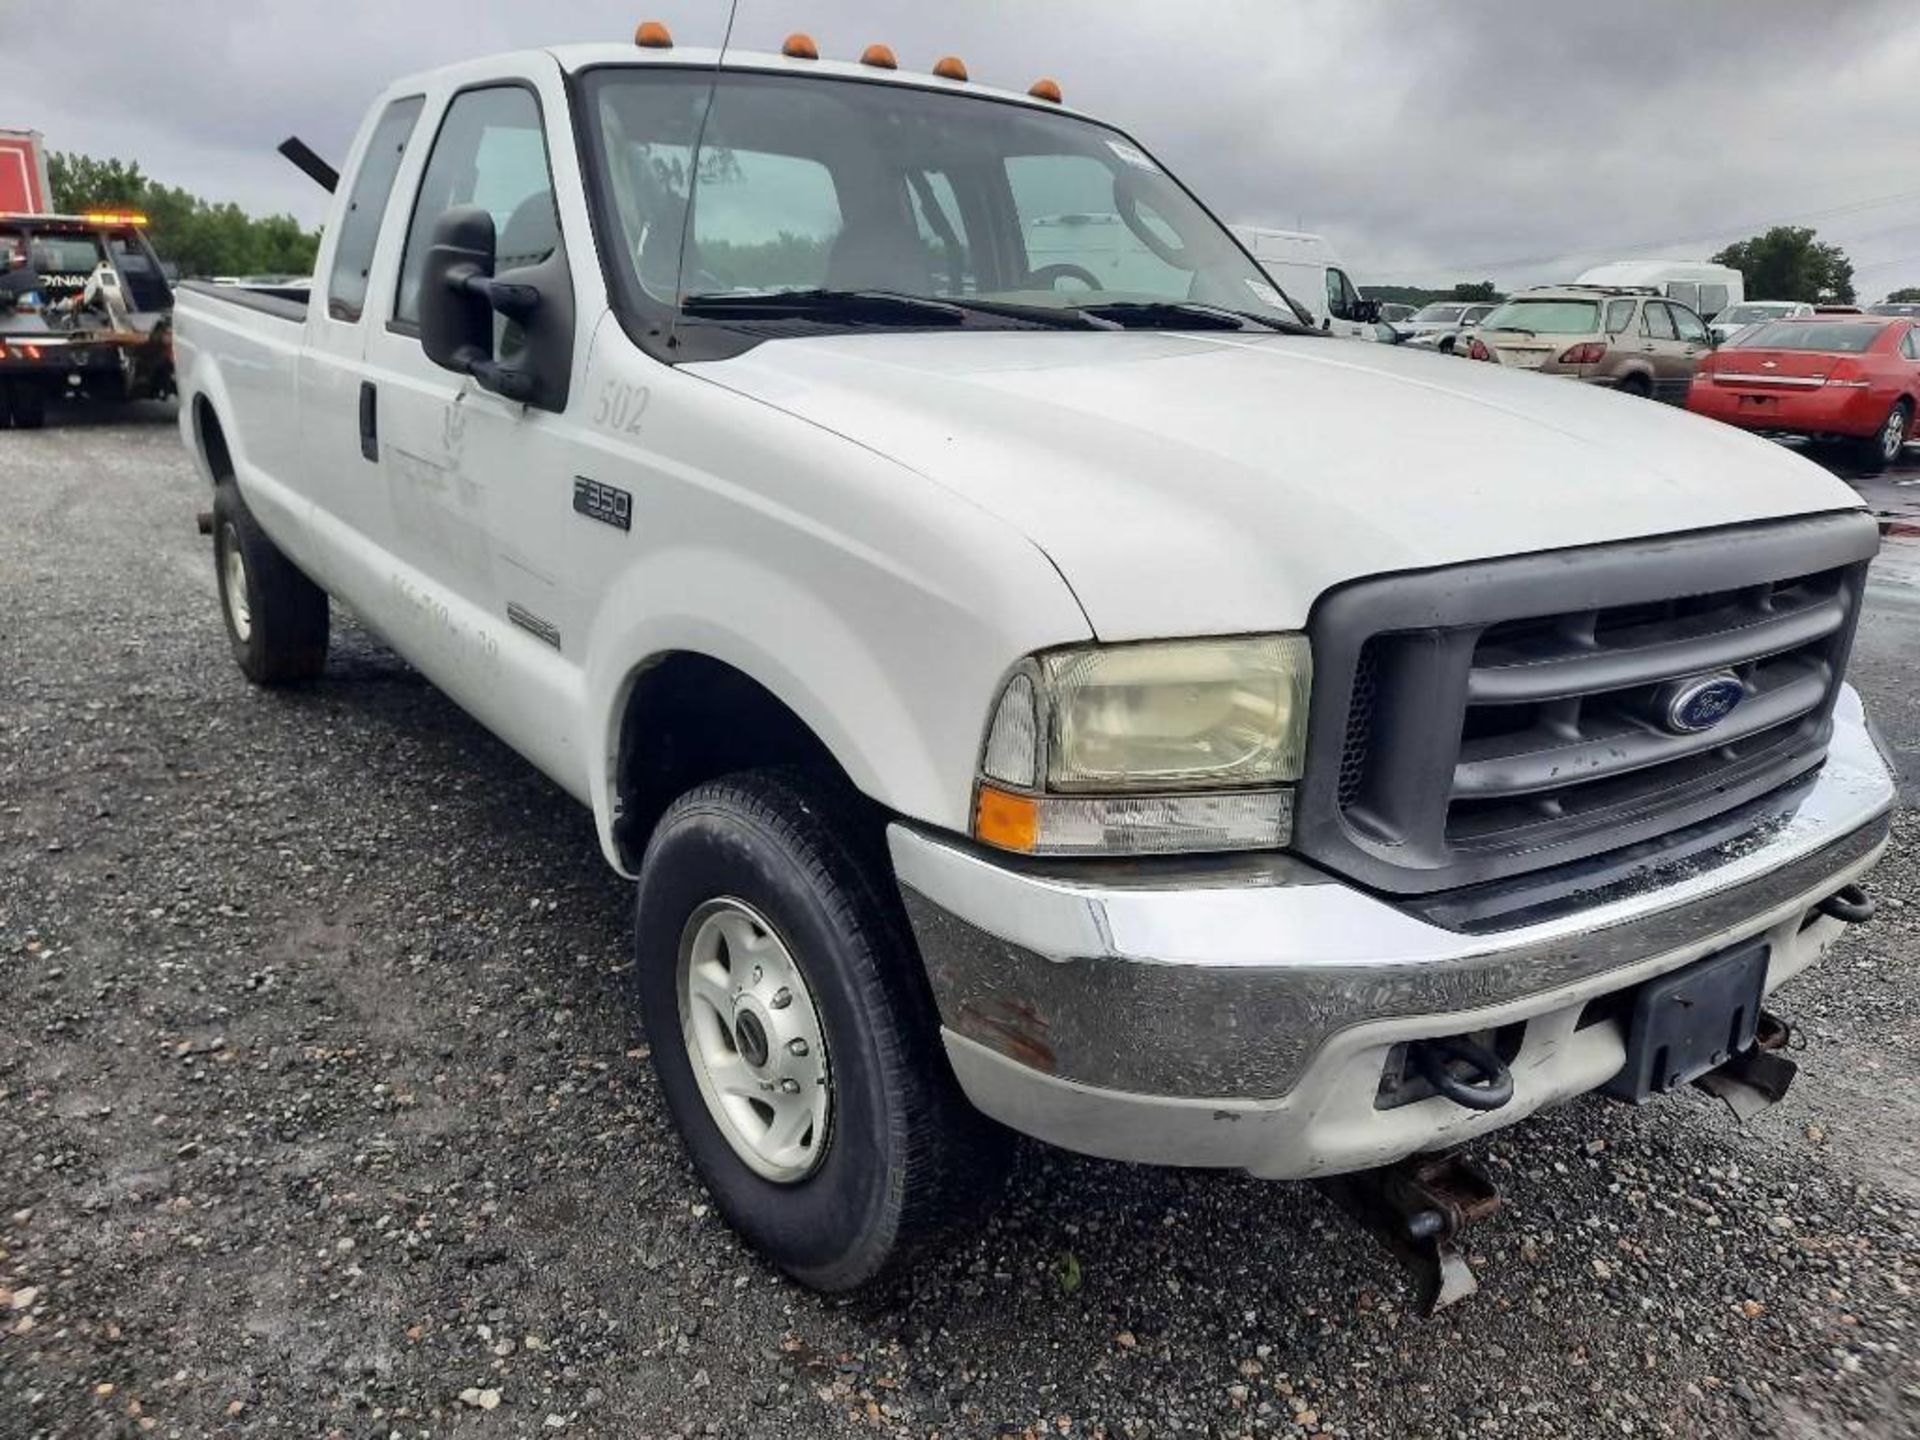 2003 Ford F350 XL Super Duty 4x4 (INOP) - Image 2 of 11